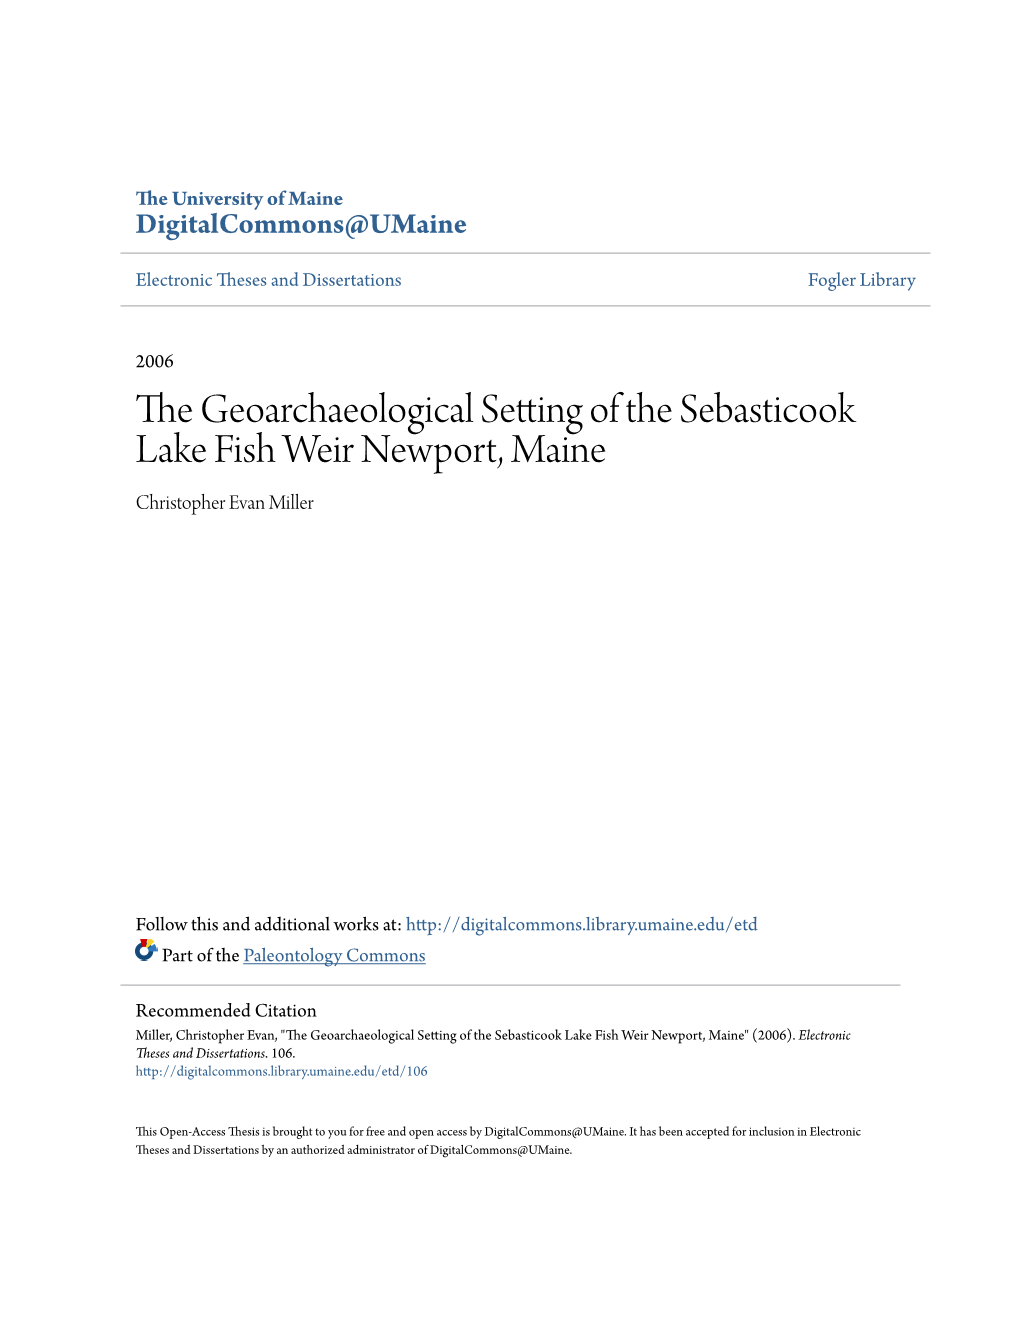 The Geoarchaeological Setting of the Sebasticook Lake Fish Weir Newport, Maine Christopher Evan Miller